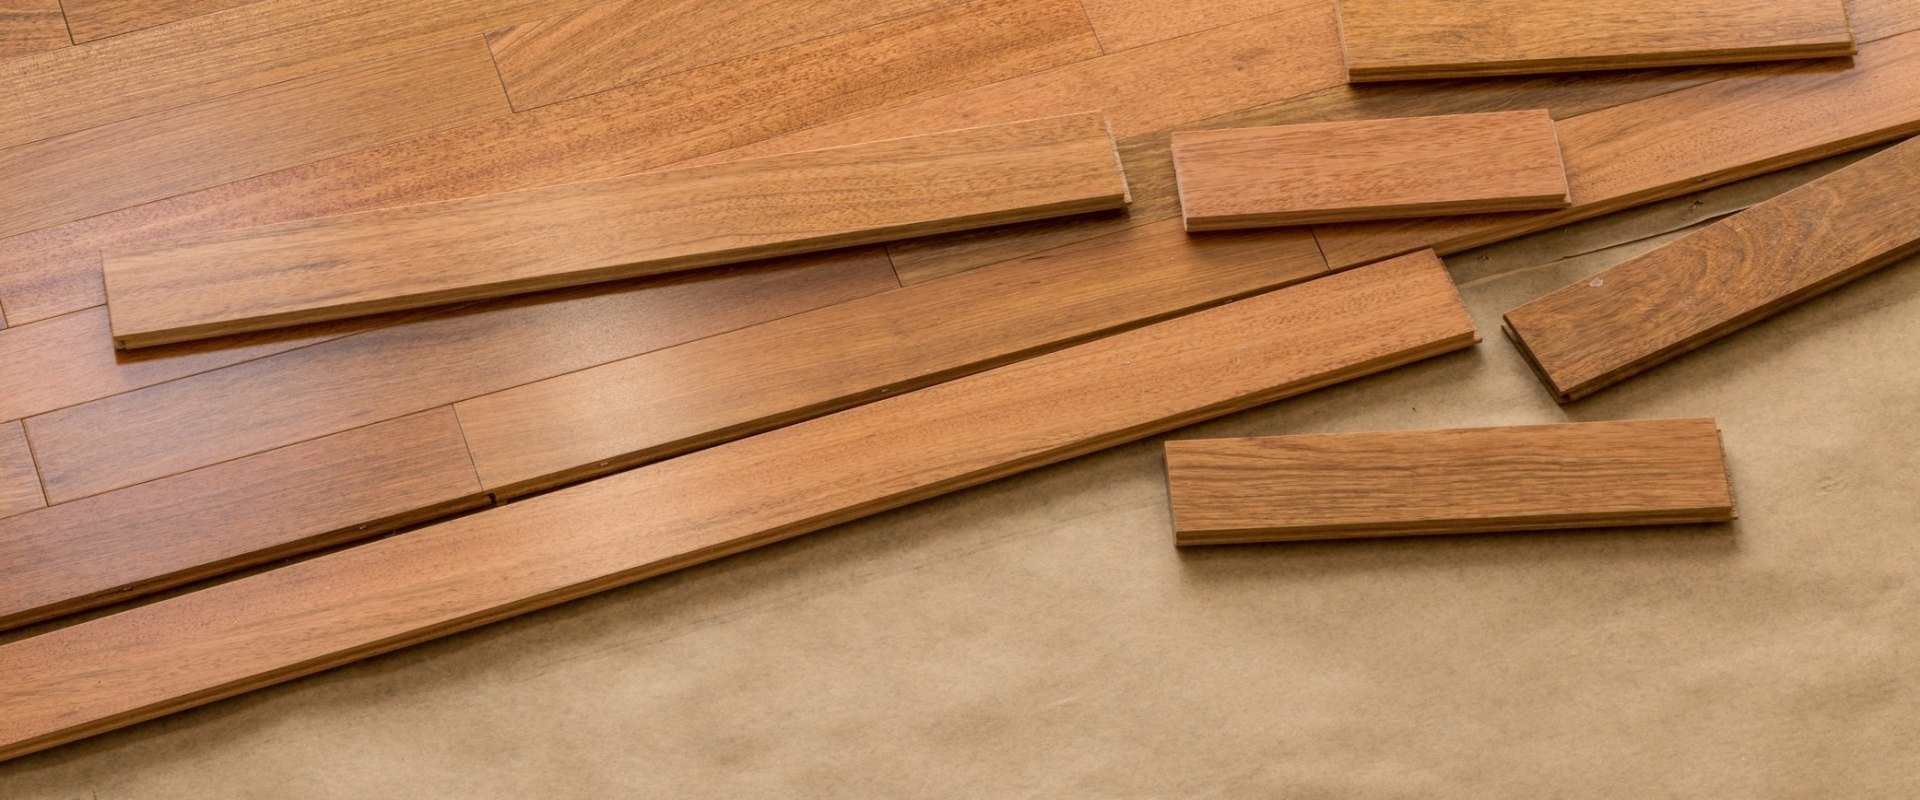 What are the primary advantages of engineered wood floors over solid wood?